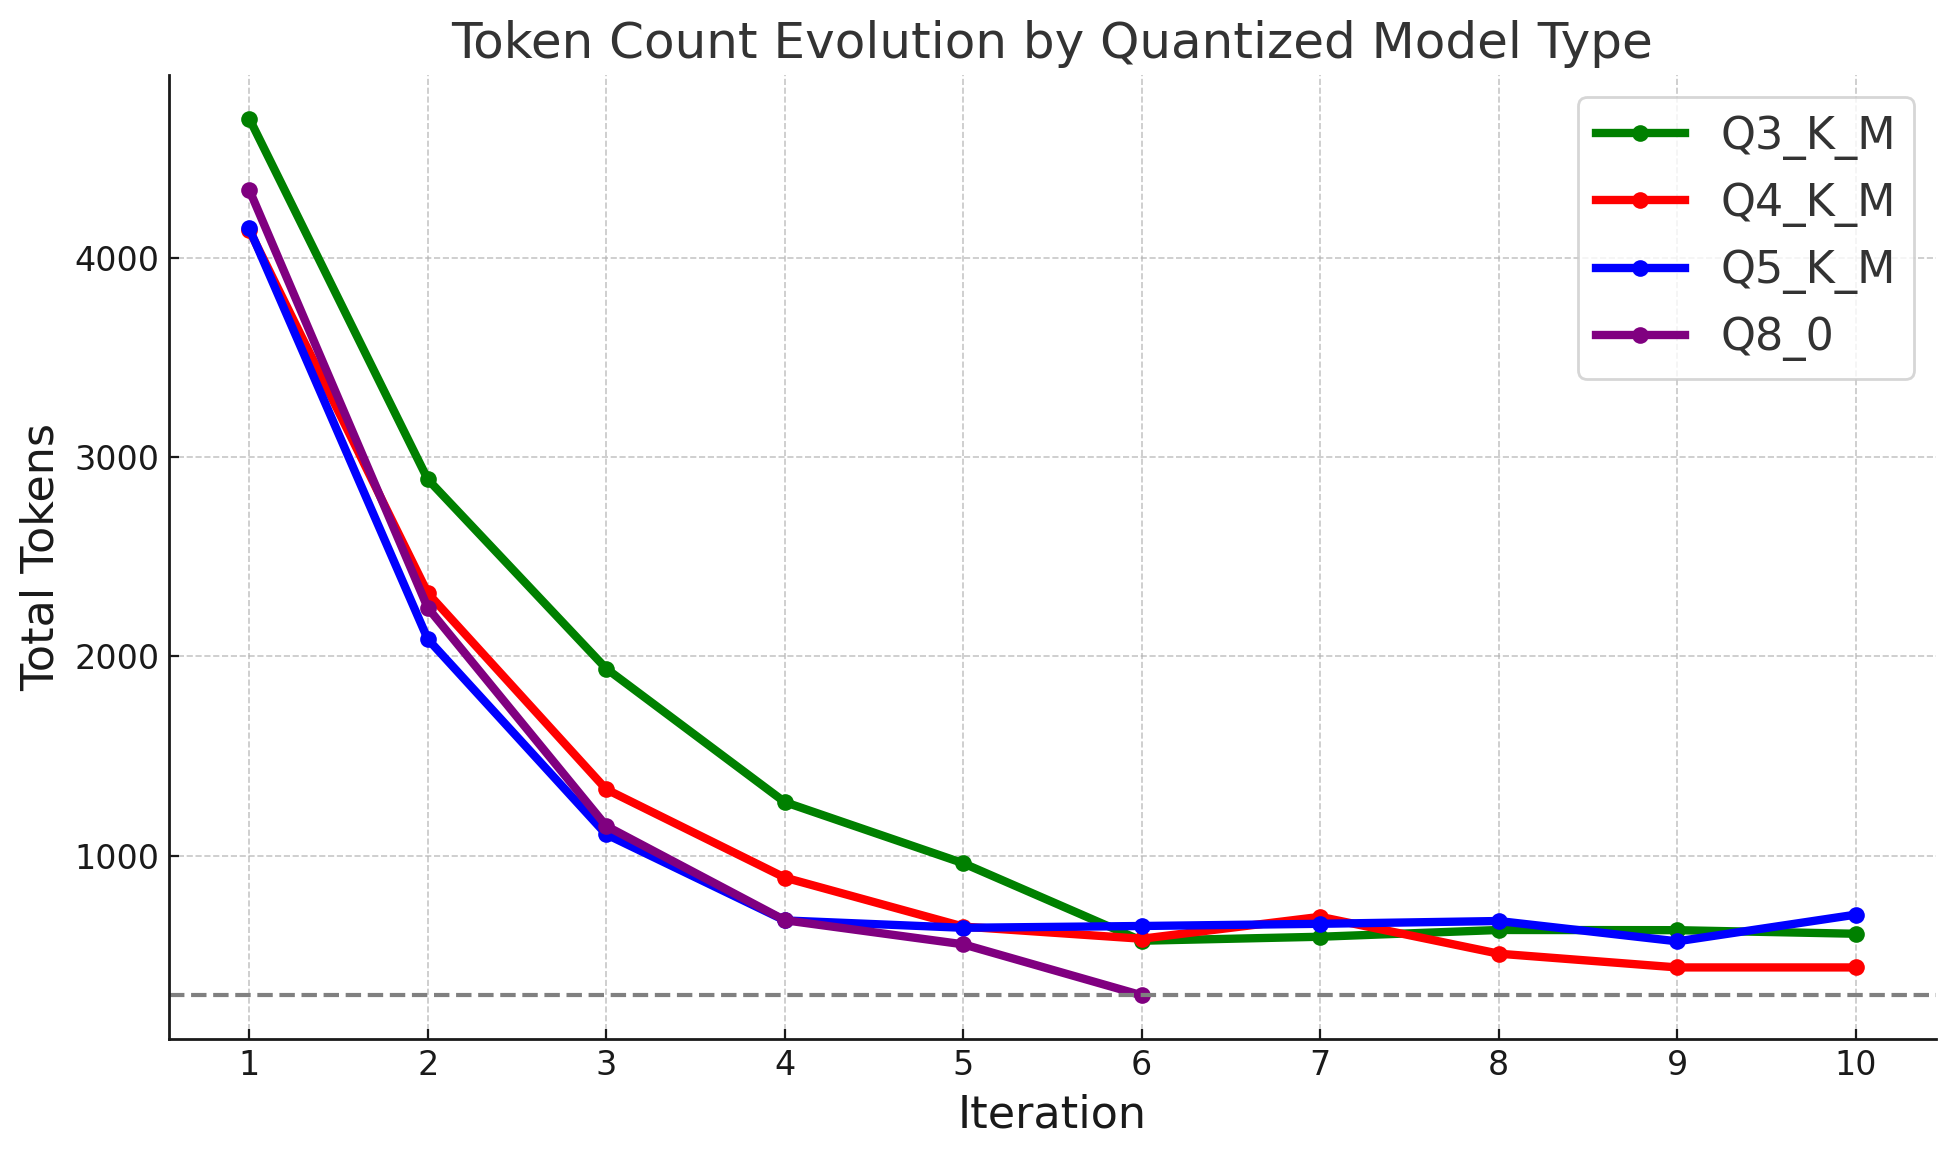 Output summary token count by model type and iteration